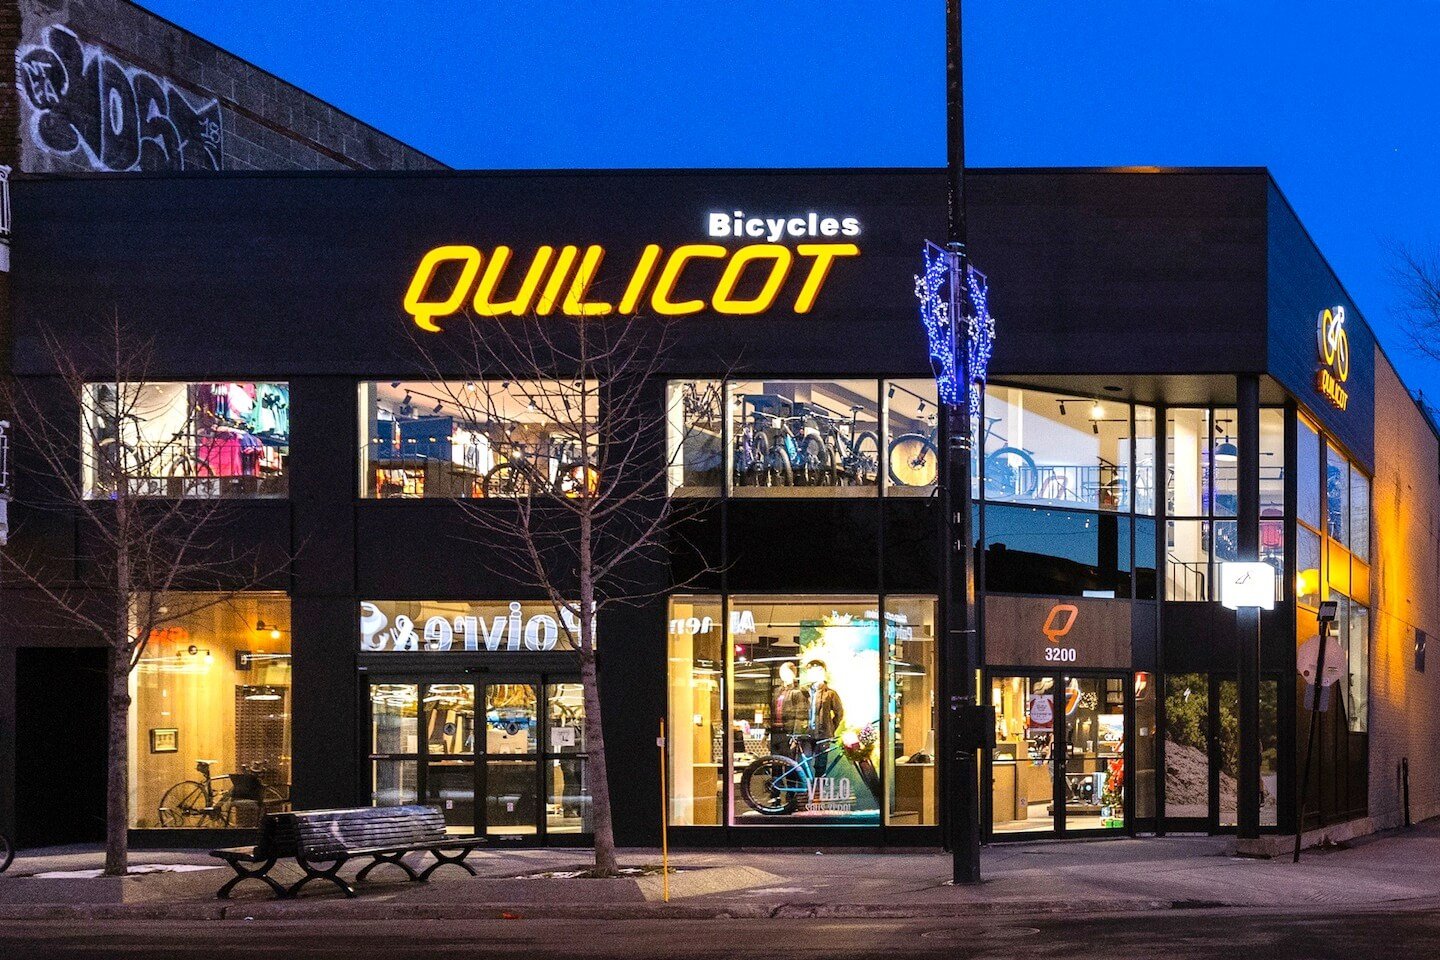 www.bicyclesquilicot.com